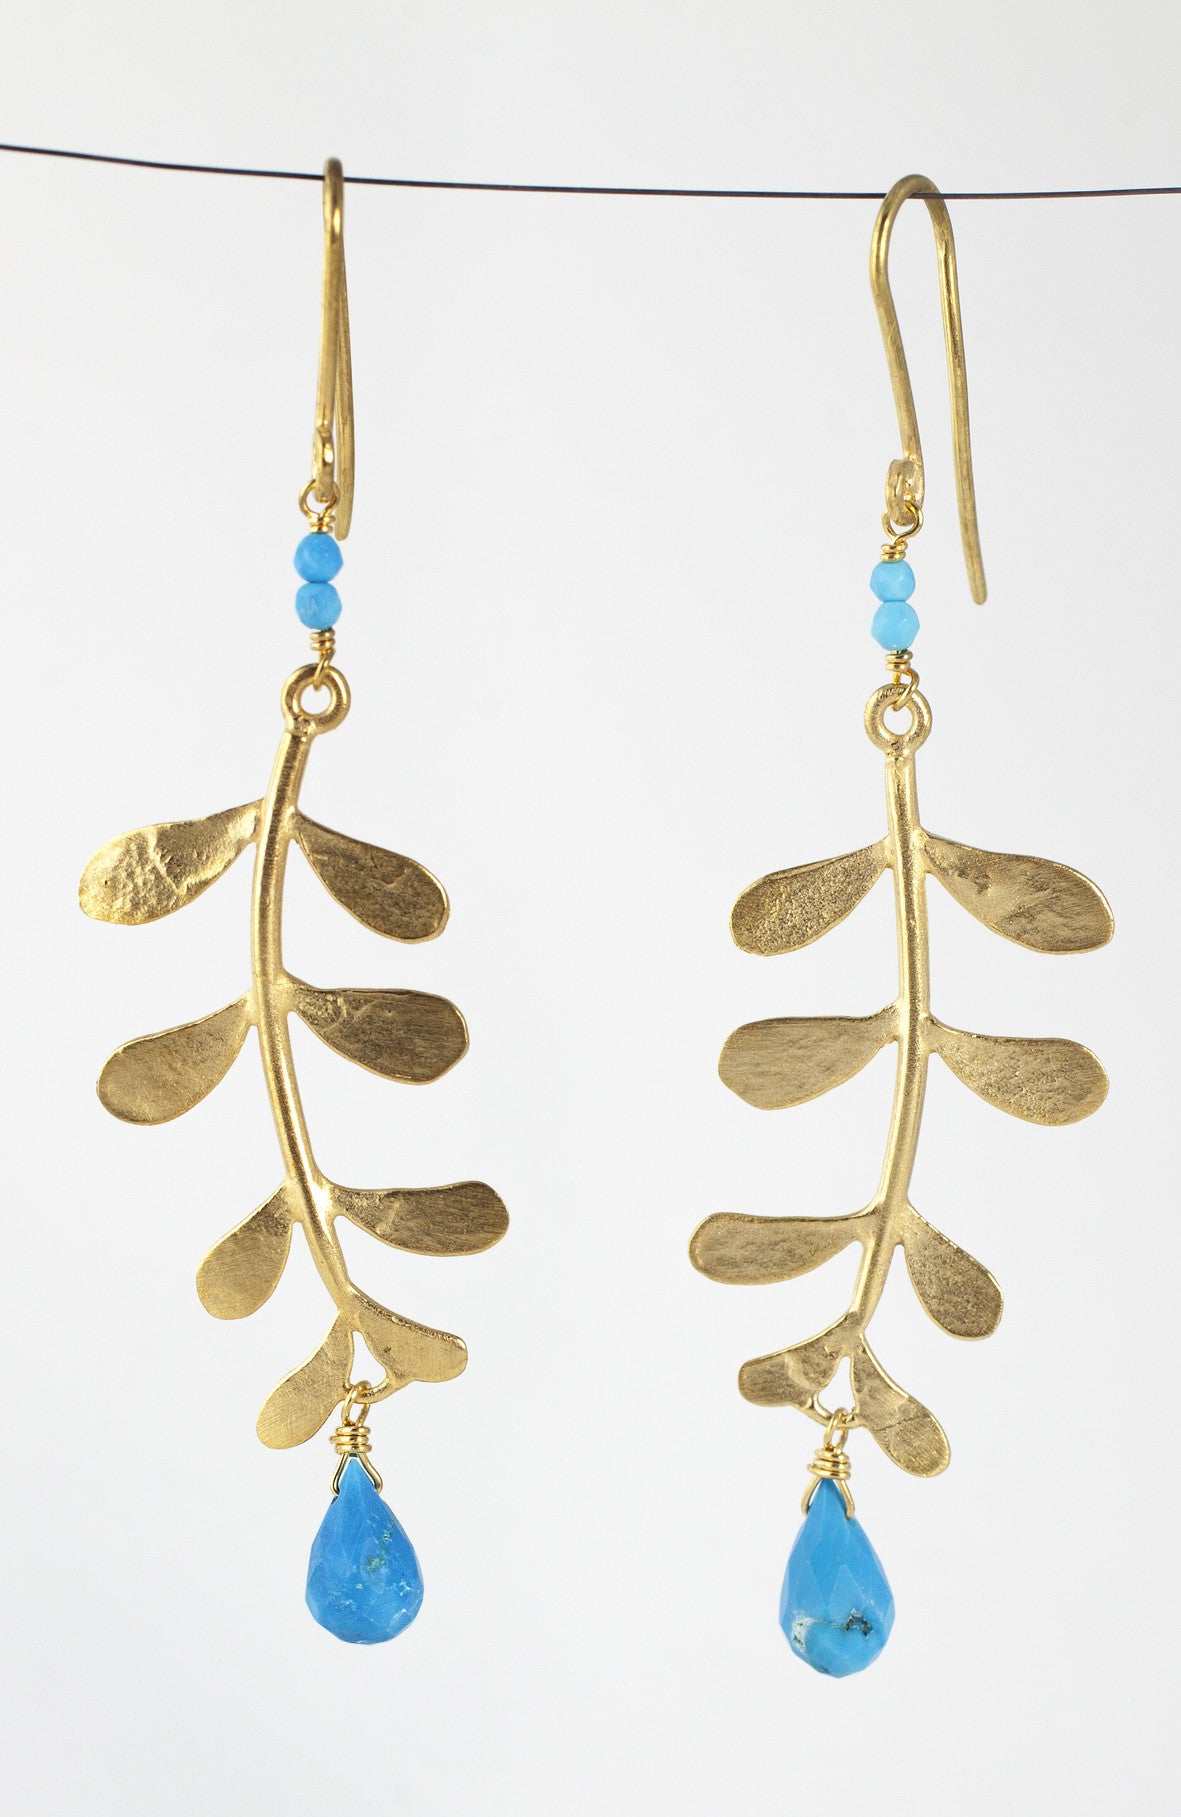 Gold Plated Evie Leaf earrings with gemstone drops